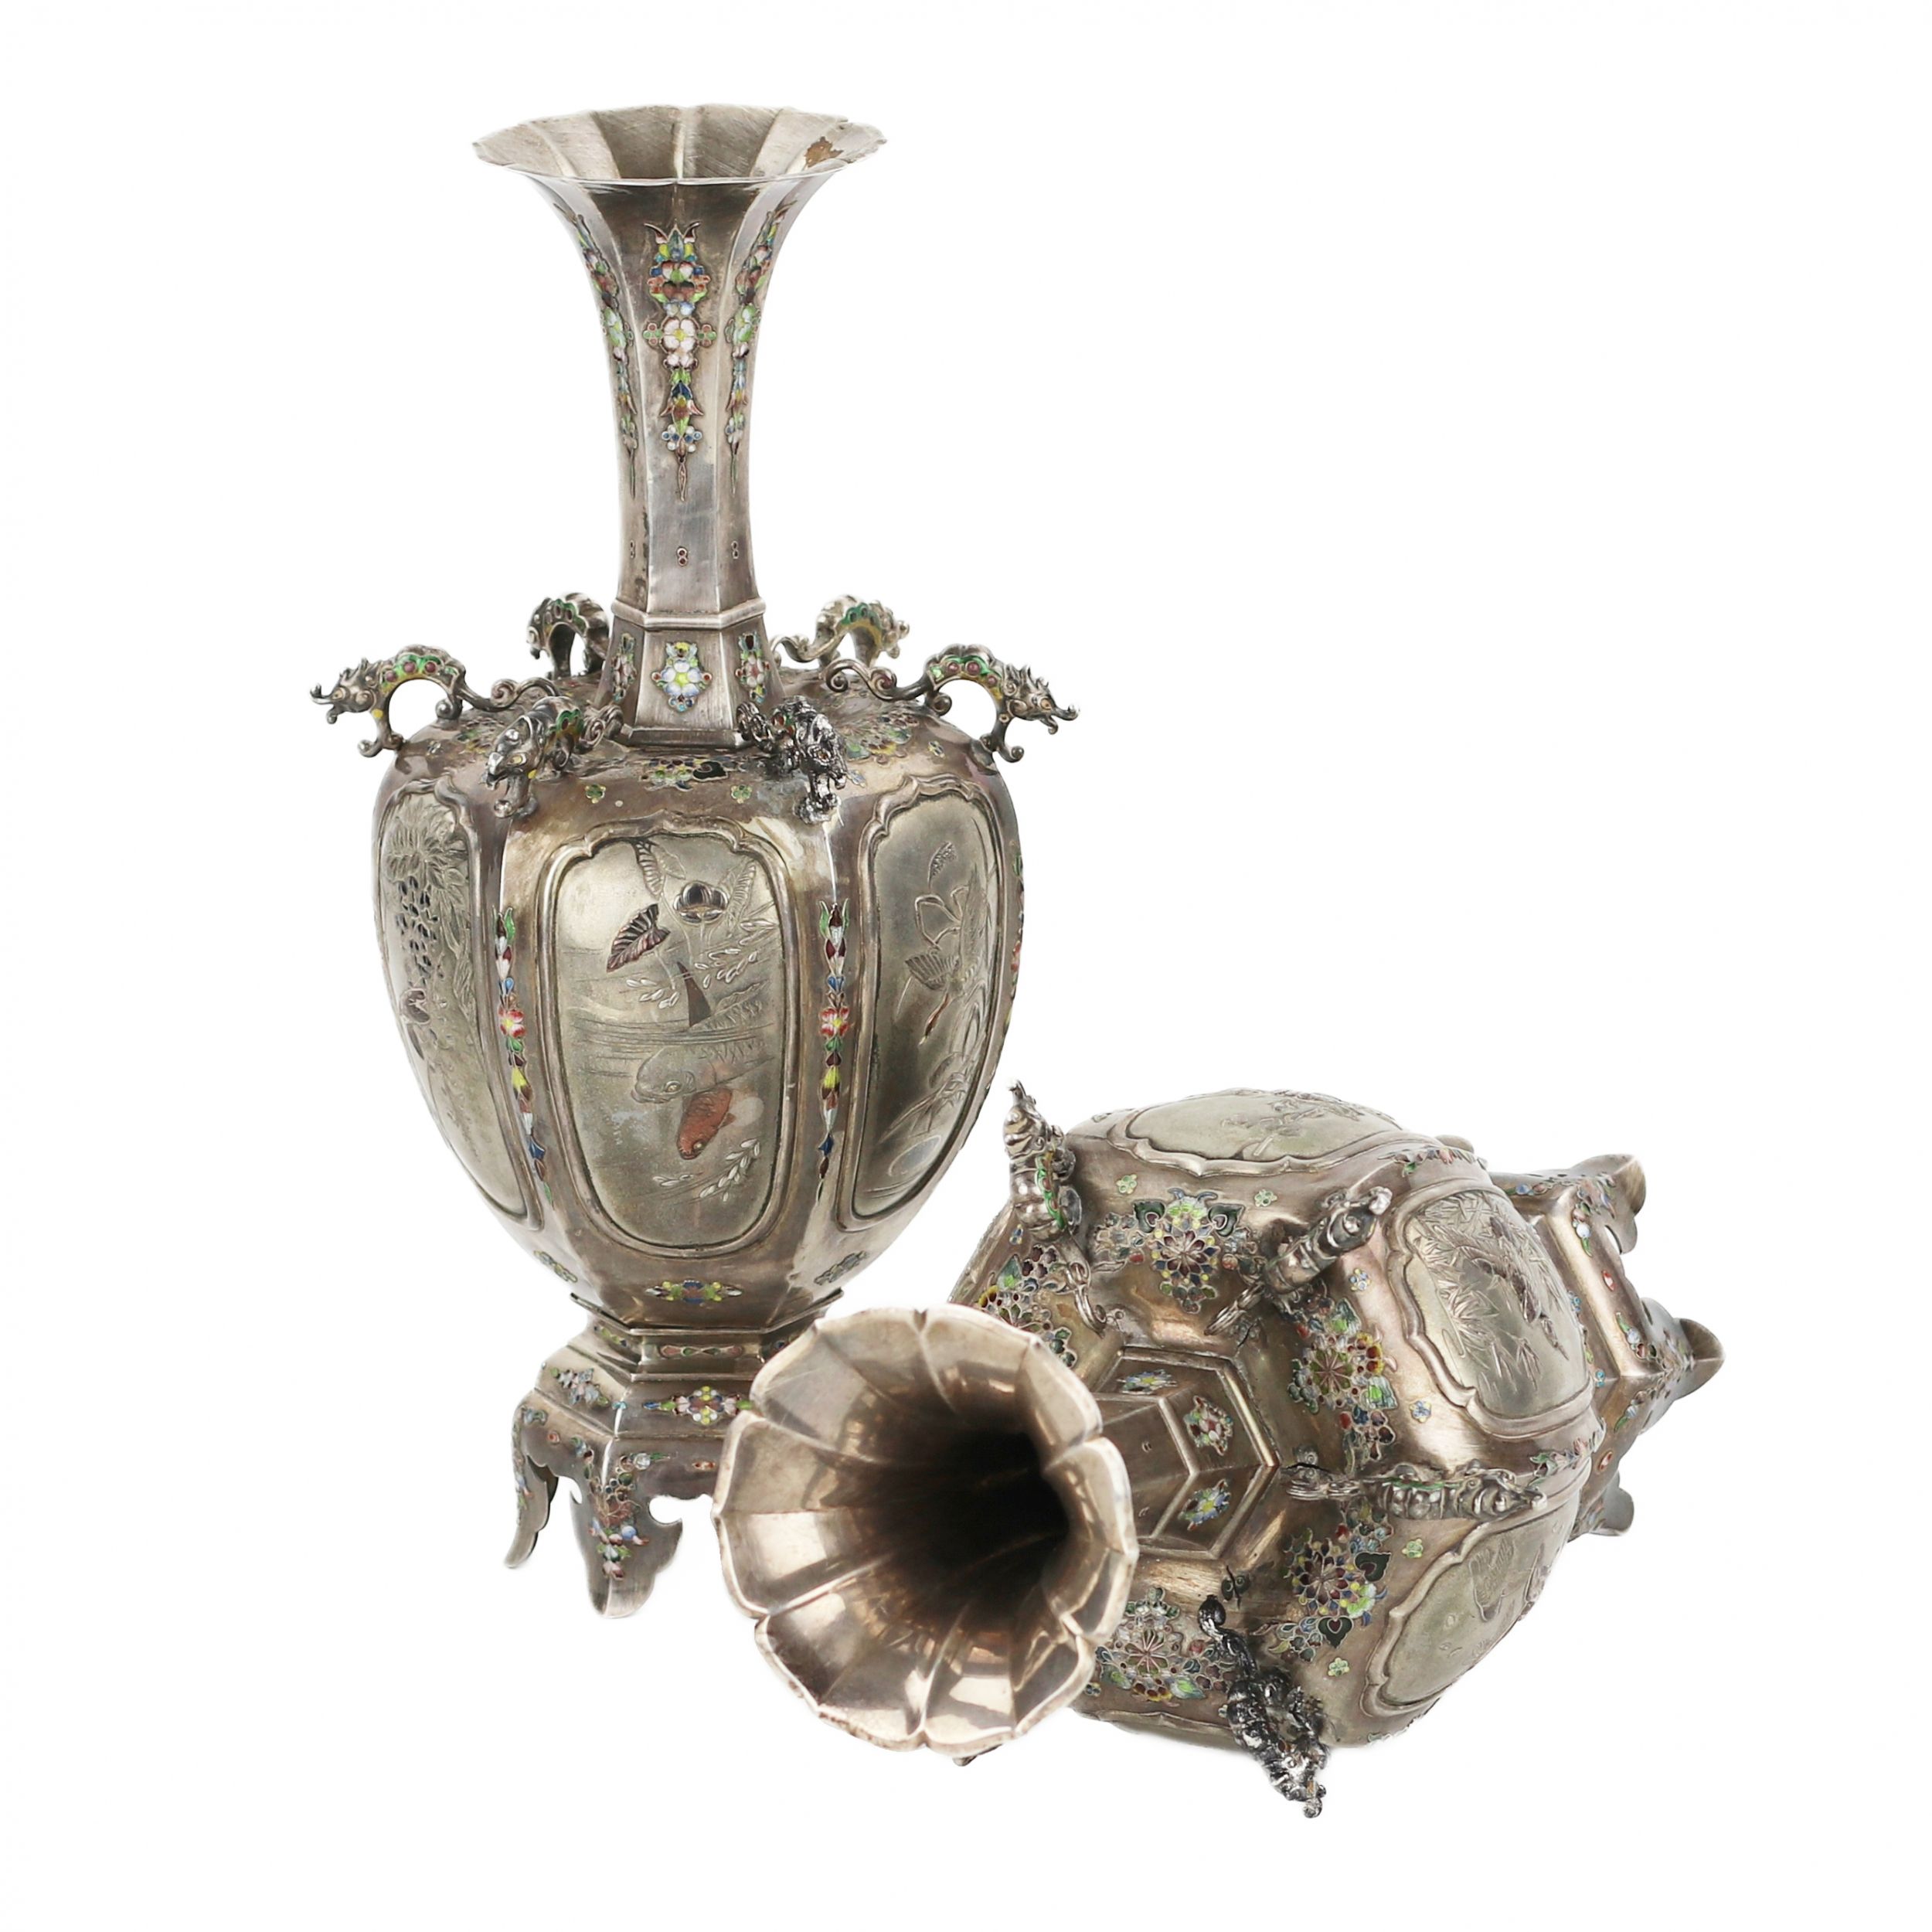 A pair of elegant Japanese vases made of silver and enamel. The turn of the 19th-20th centuries. - Bild 4 aus 6